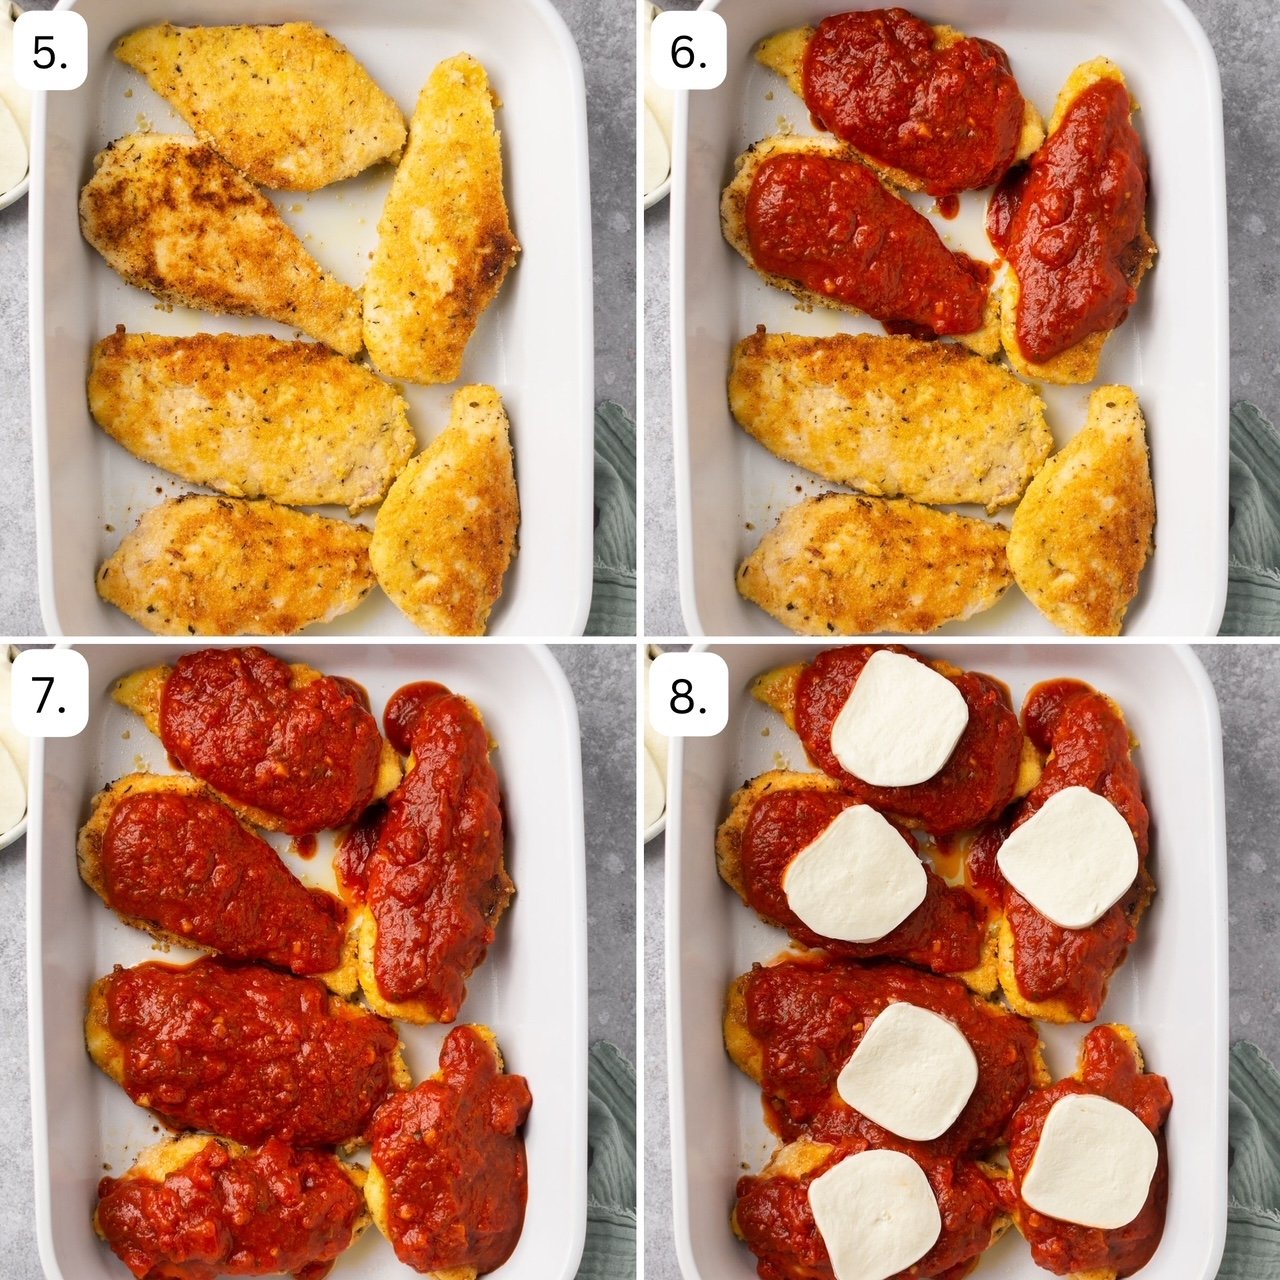 the last 4 steps for making gluten free chicken parmesan